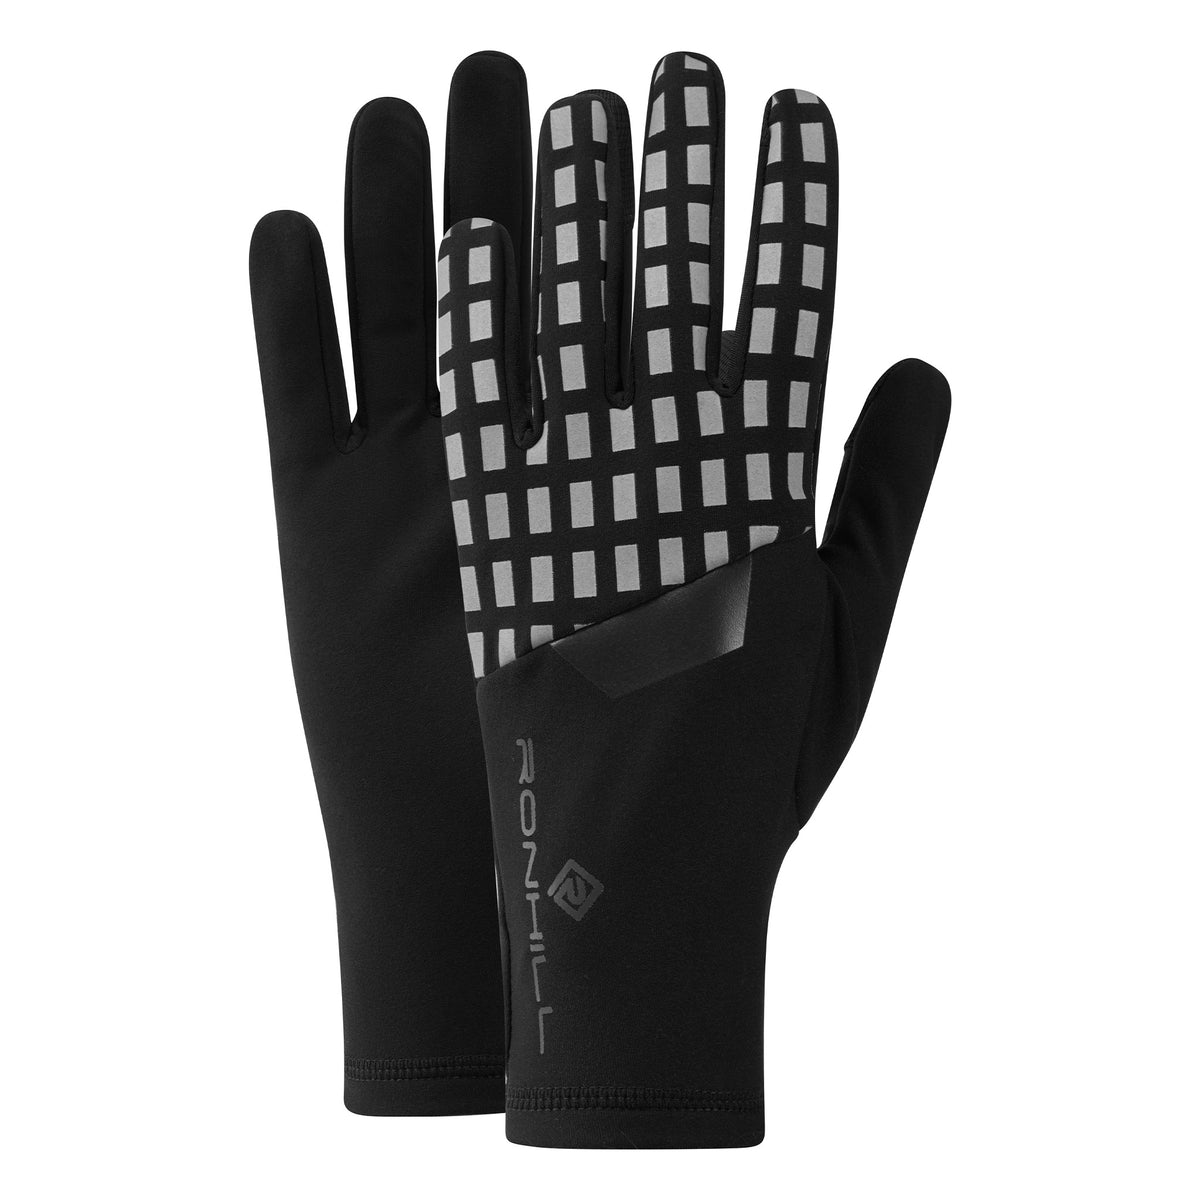 Ronhill Afterhours Glove: Black/BrWhite/Reflect